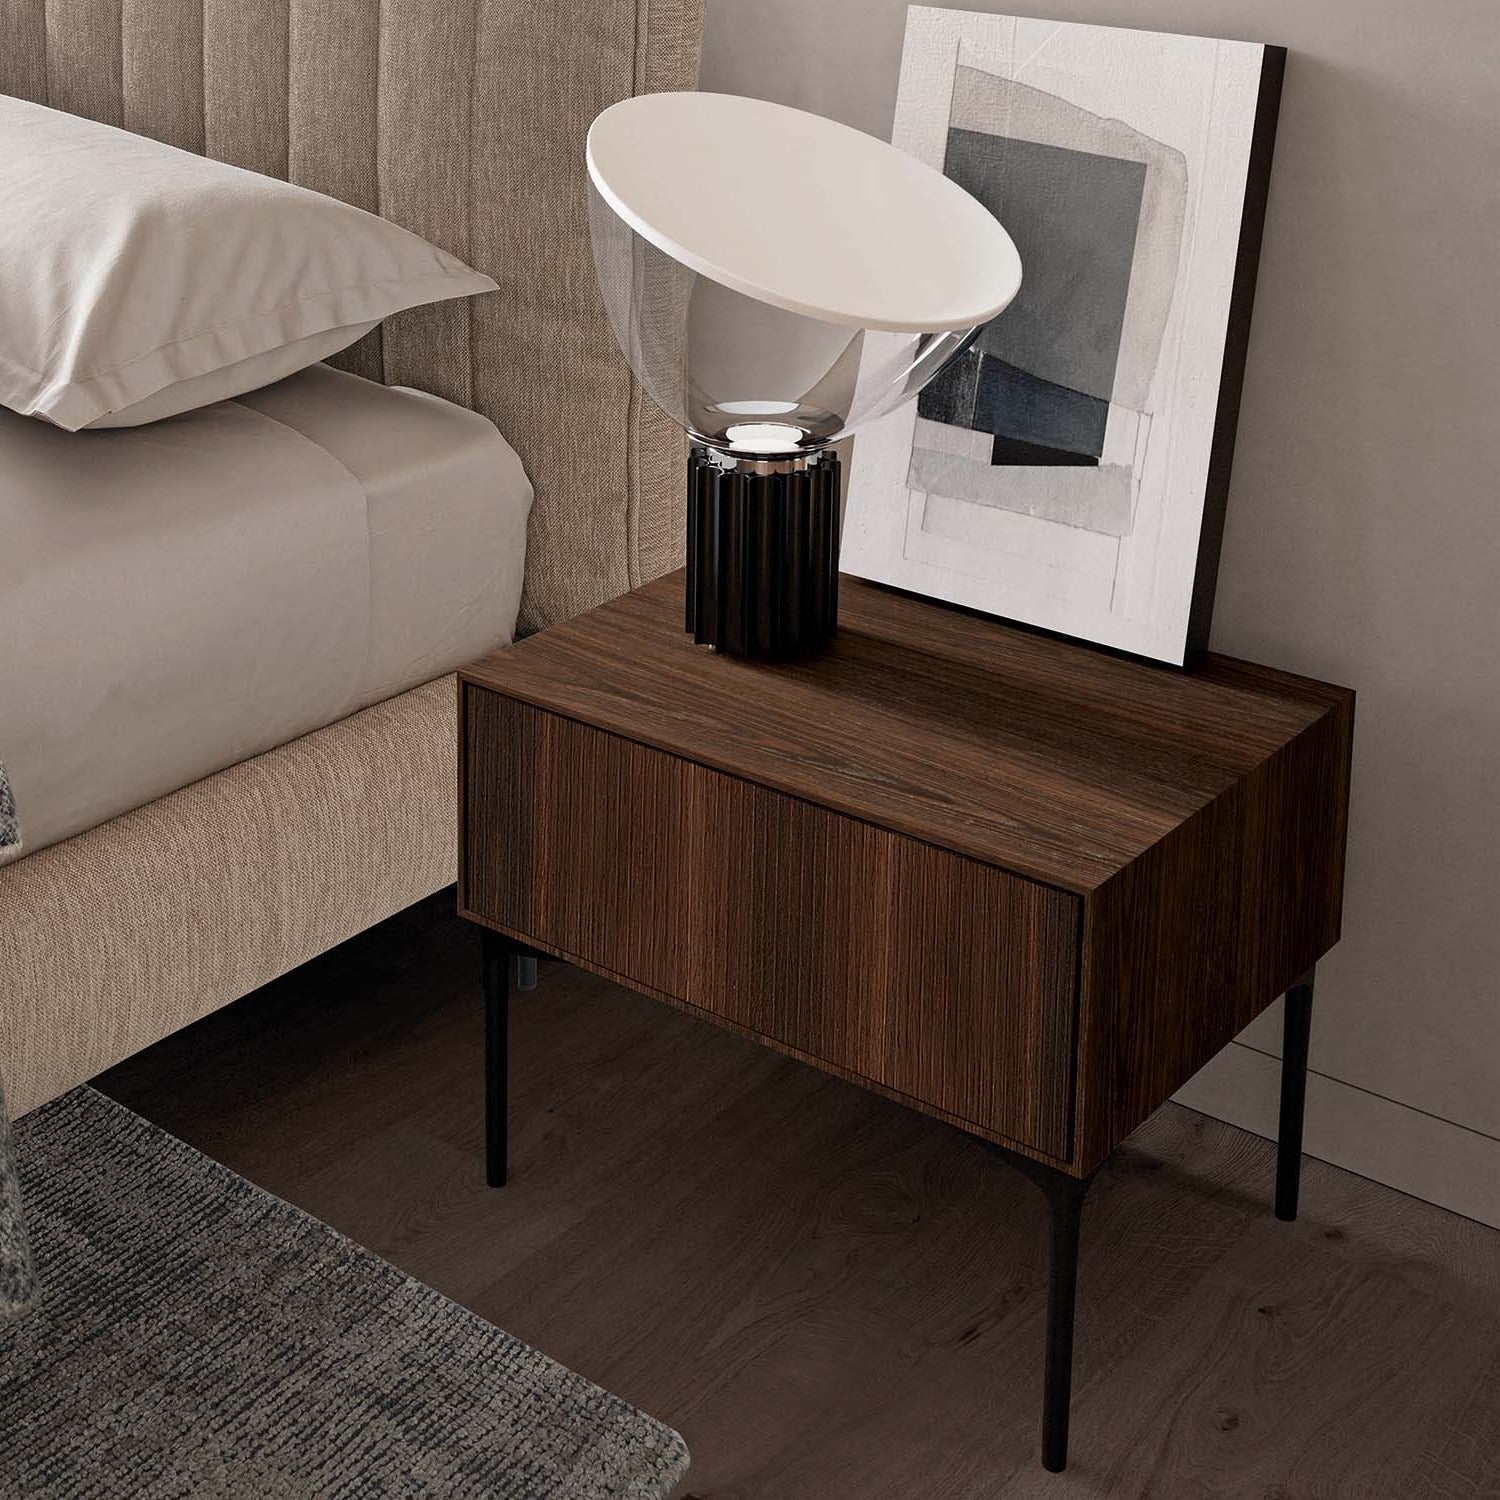 Kompos bedside table by Dall'Agnese